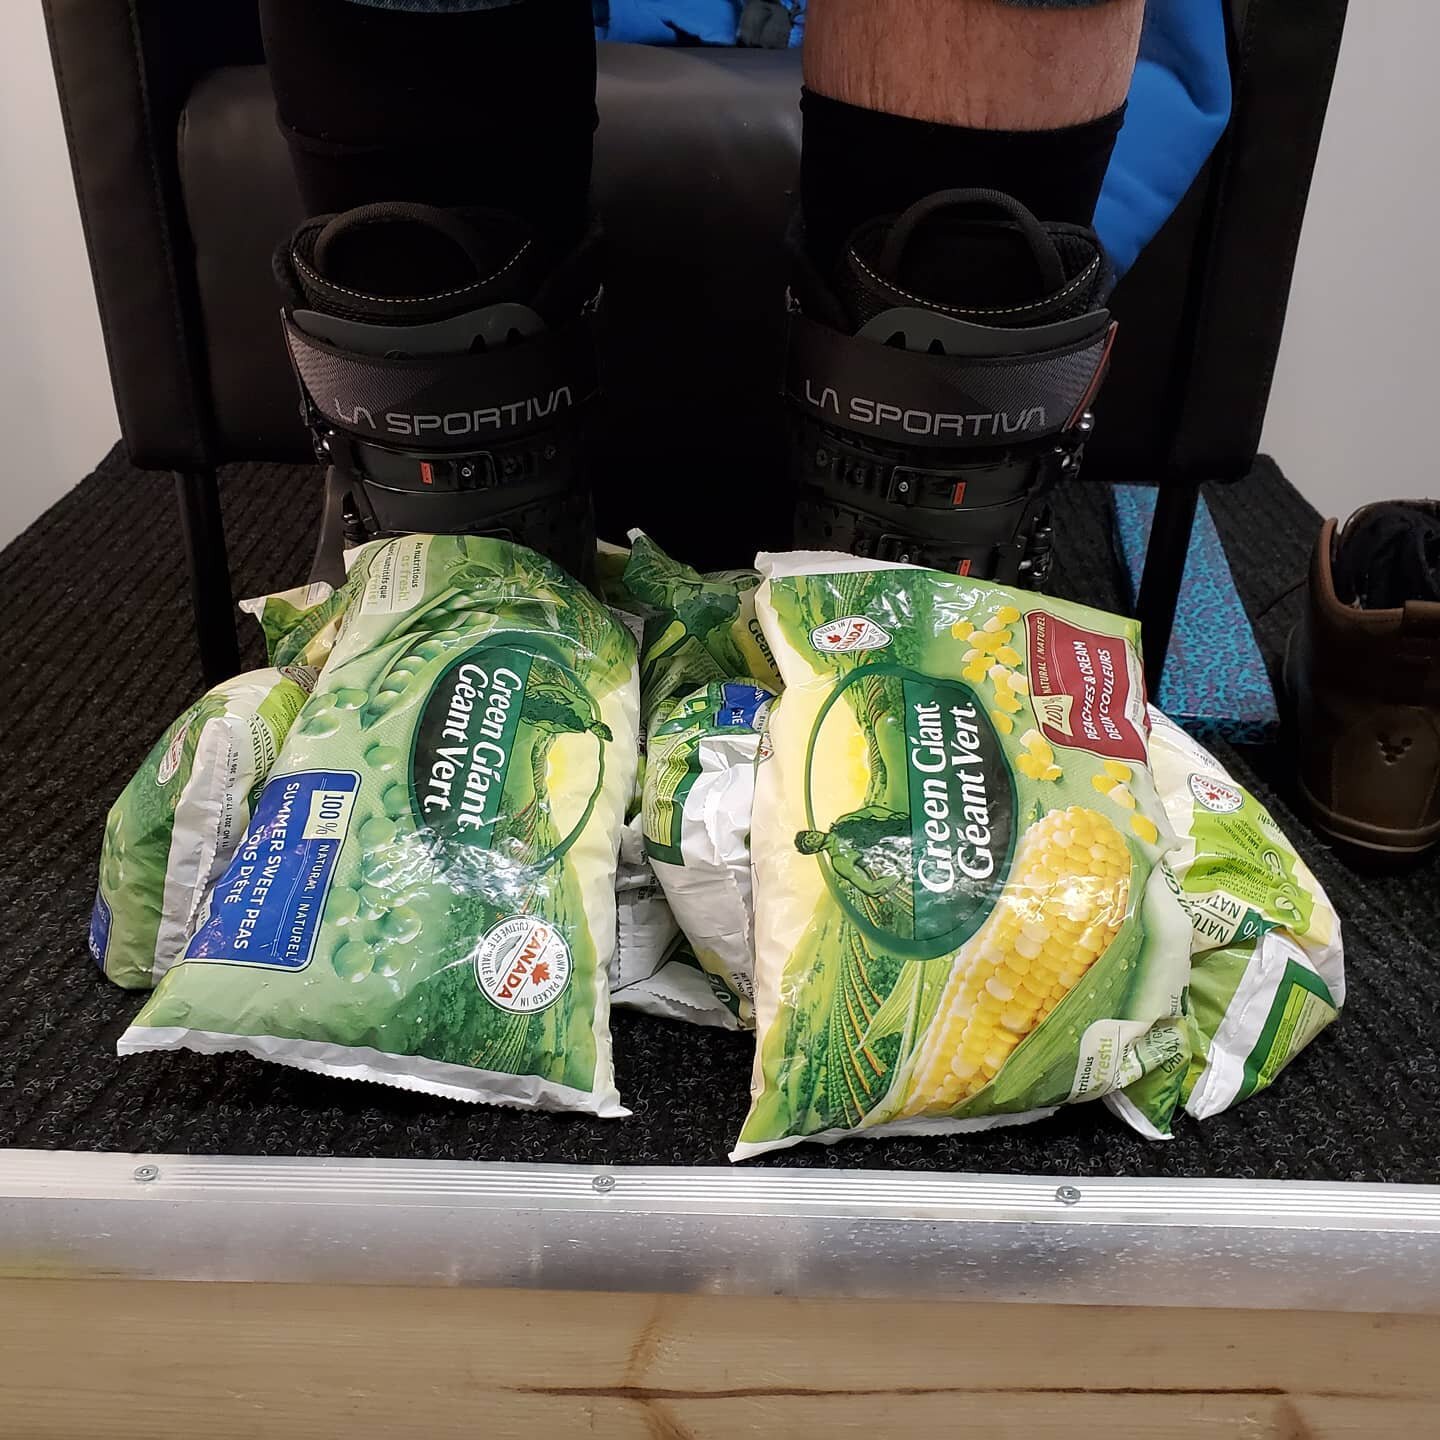 Can't go wrong with some good old peas and corn. #gogreen
#bootfitting #lasportivavega #keepitsimple #skitouring